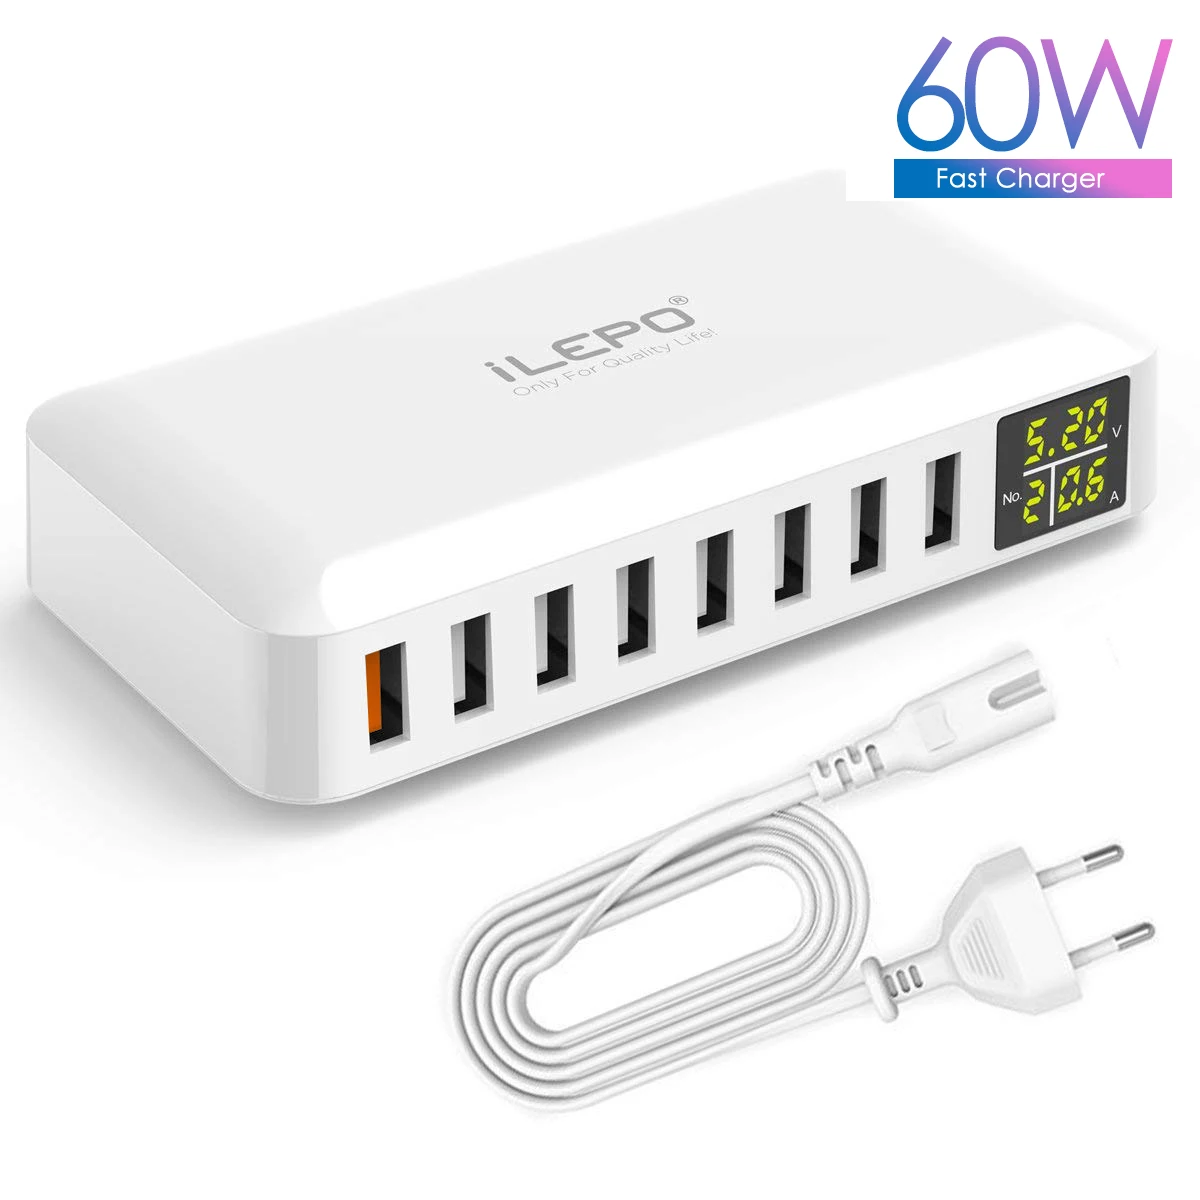 

ilepo 60W 8 Ports Fast Charger QC3.0 Quick Charger with Cable Digital Display USB Charger For iPhone 13 12 Pro Max Samsung